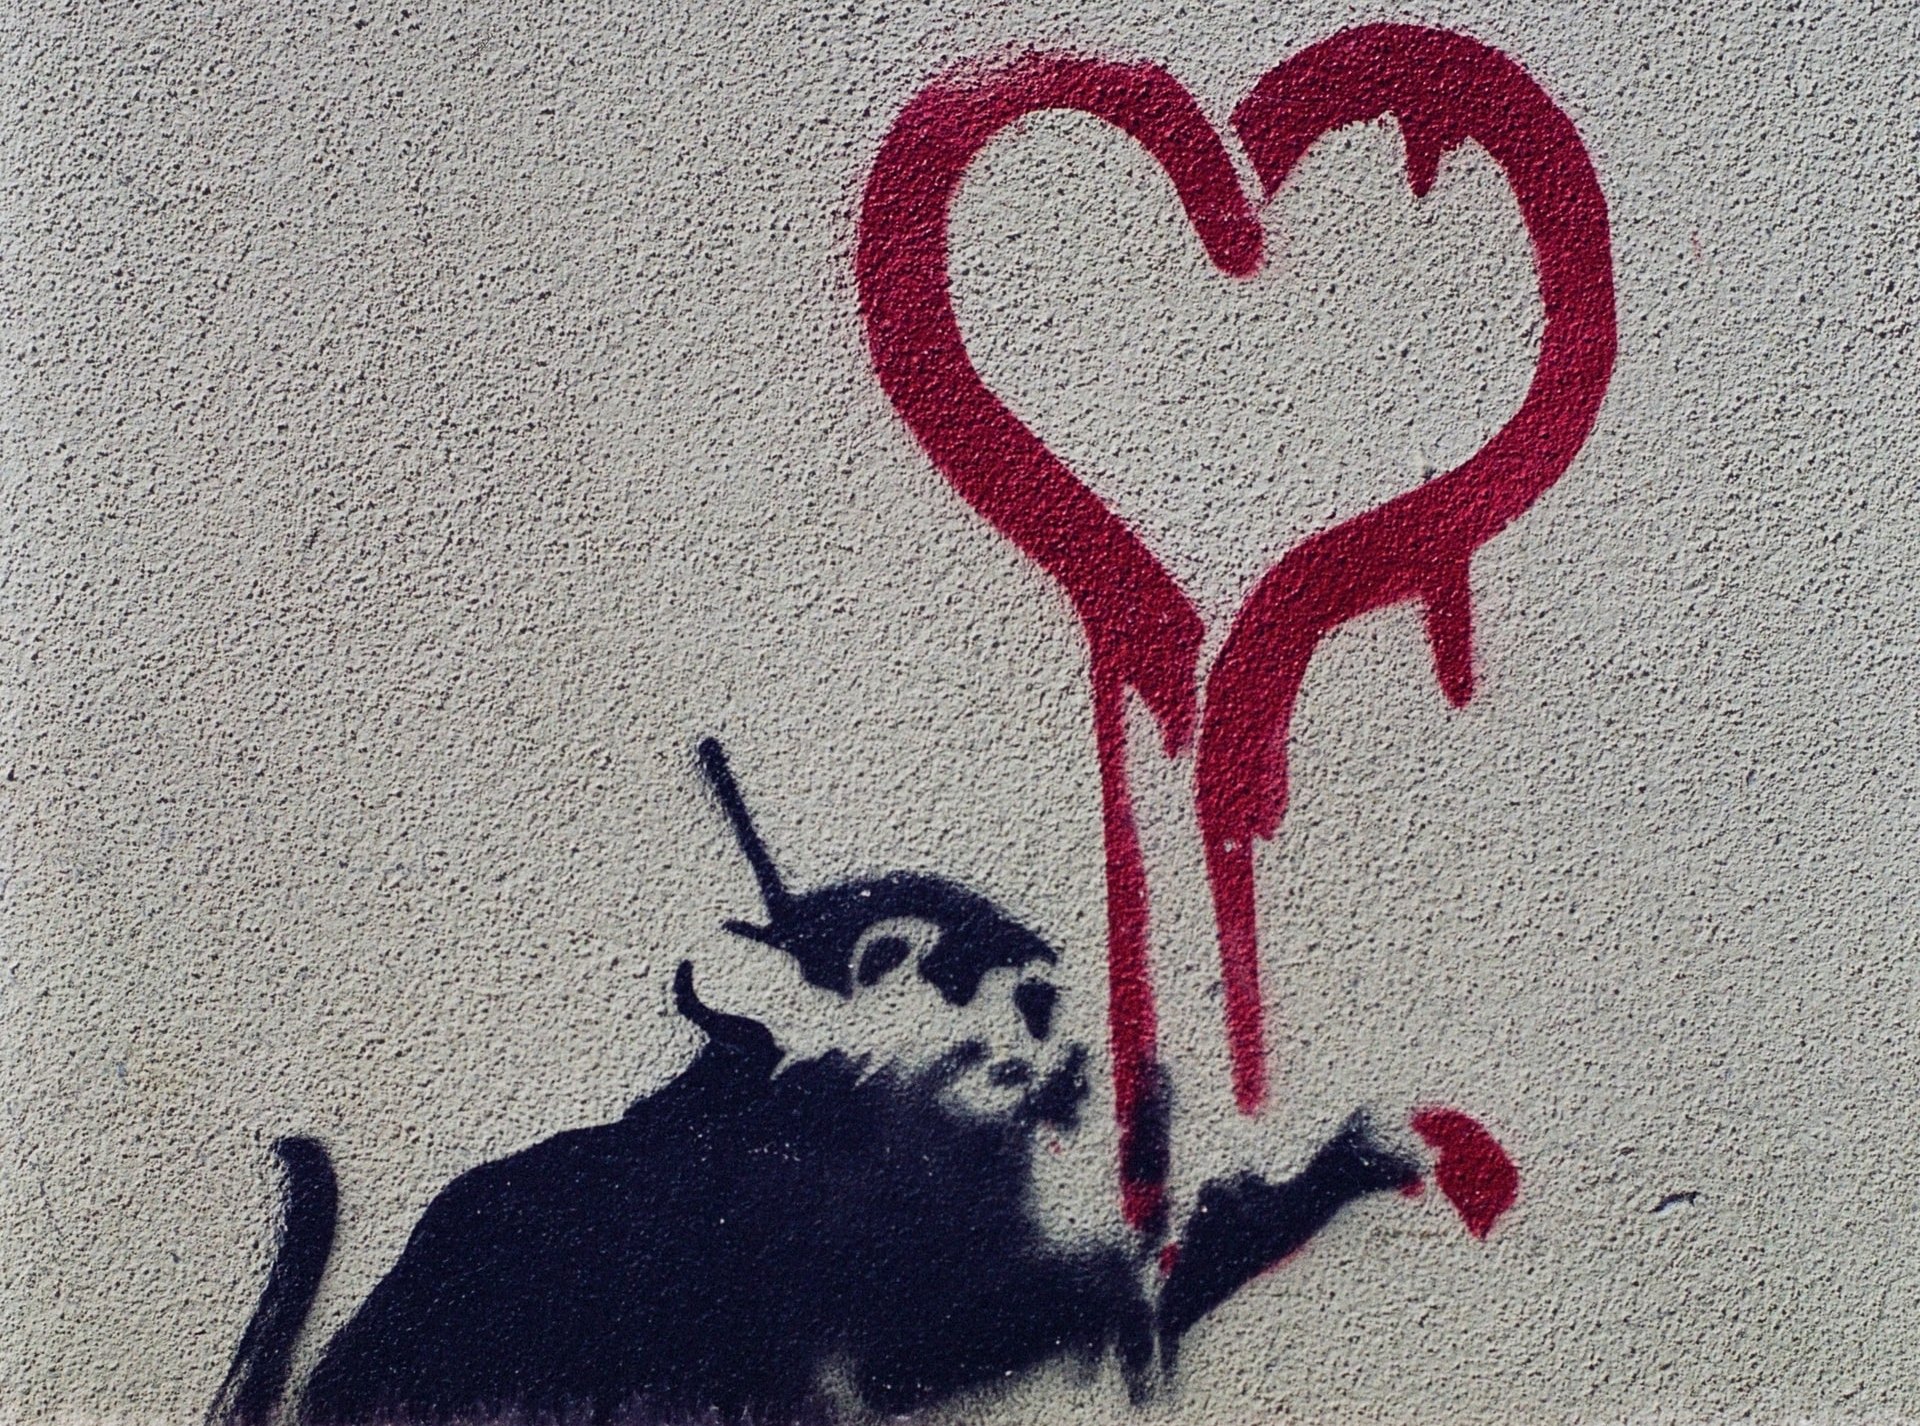 Selling the Same Banksy Print Multiple Times: How Is It Possible?